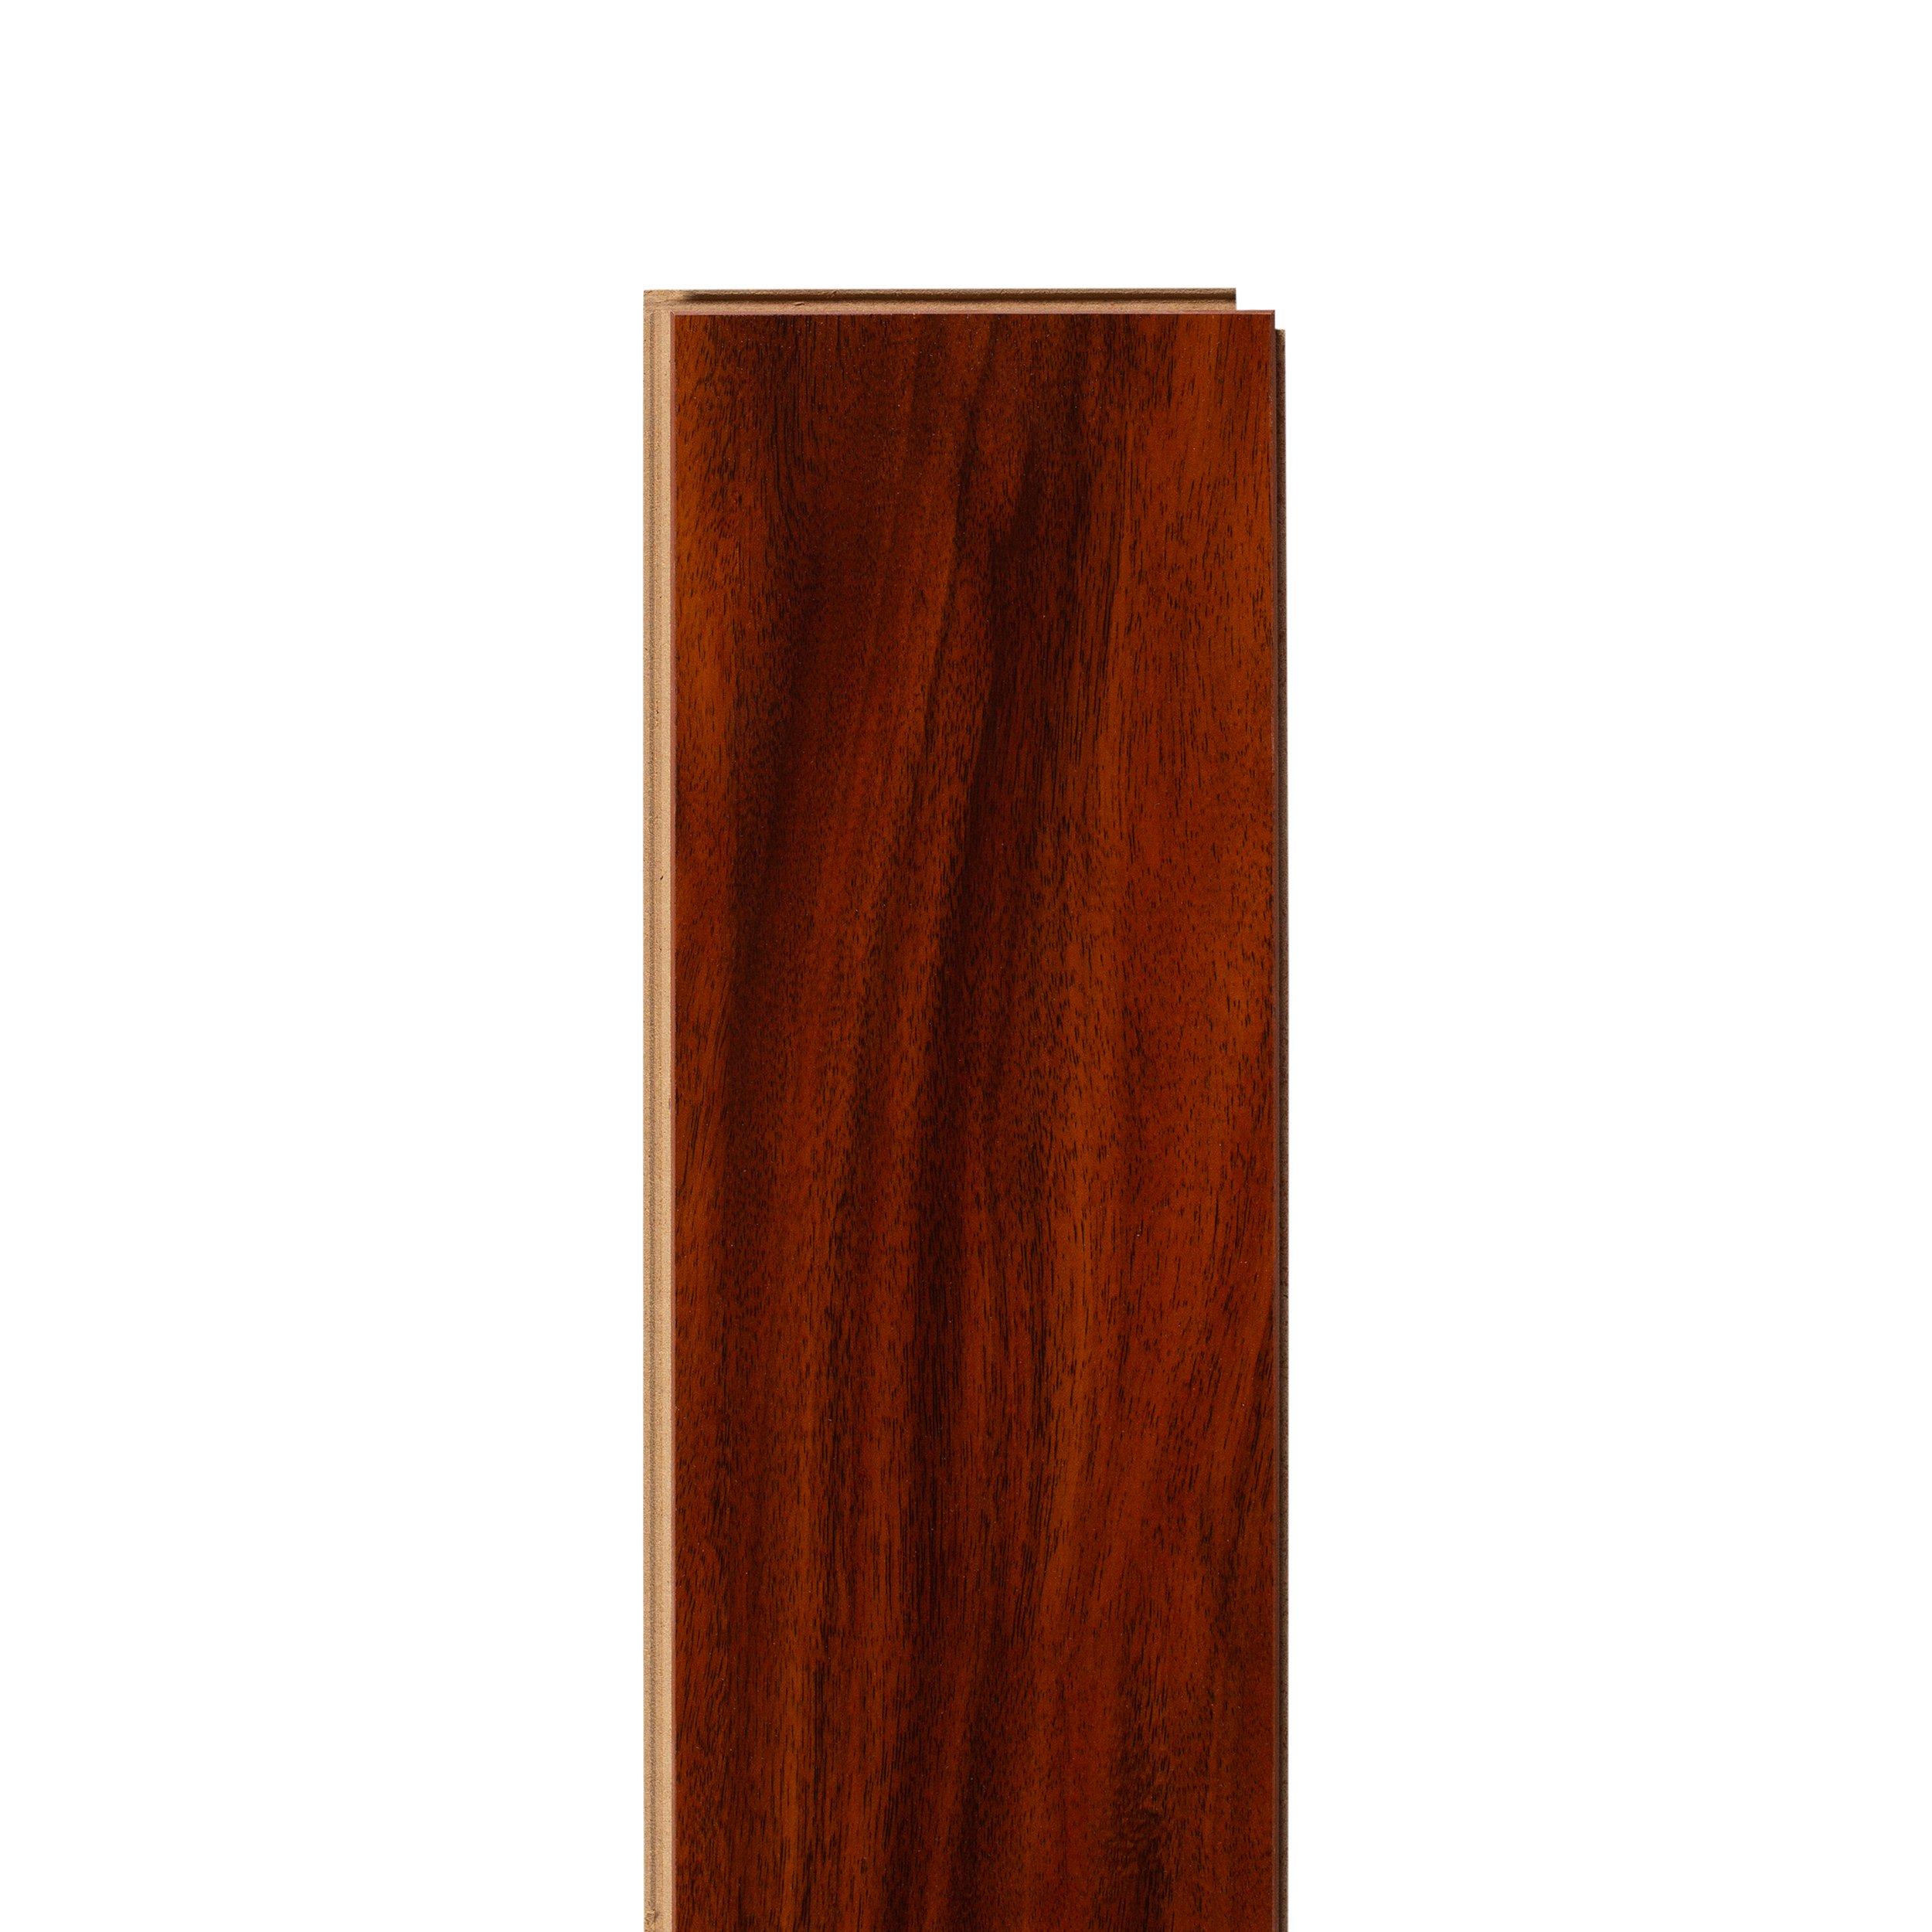 Woodmont Cherry High Gloss Water-Resistant Laminate